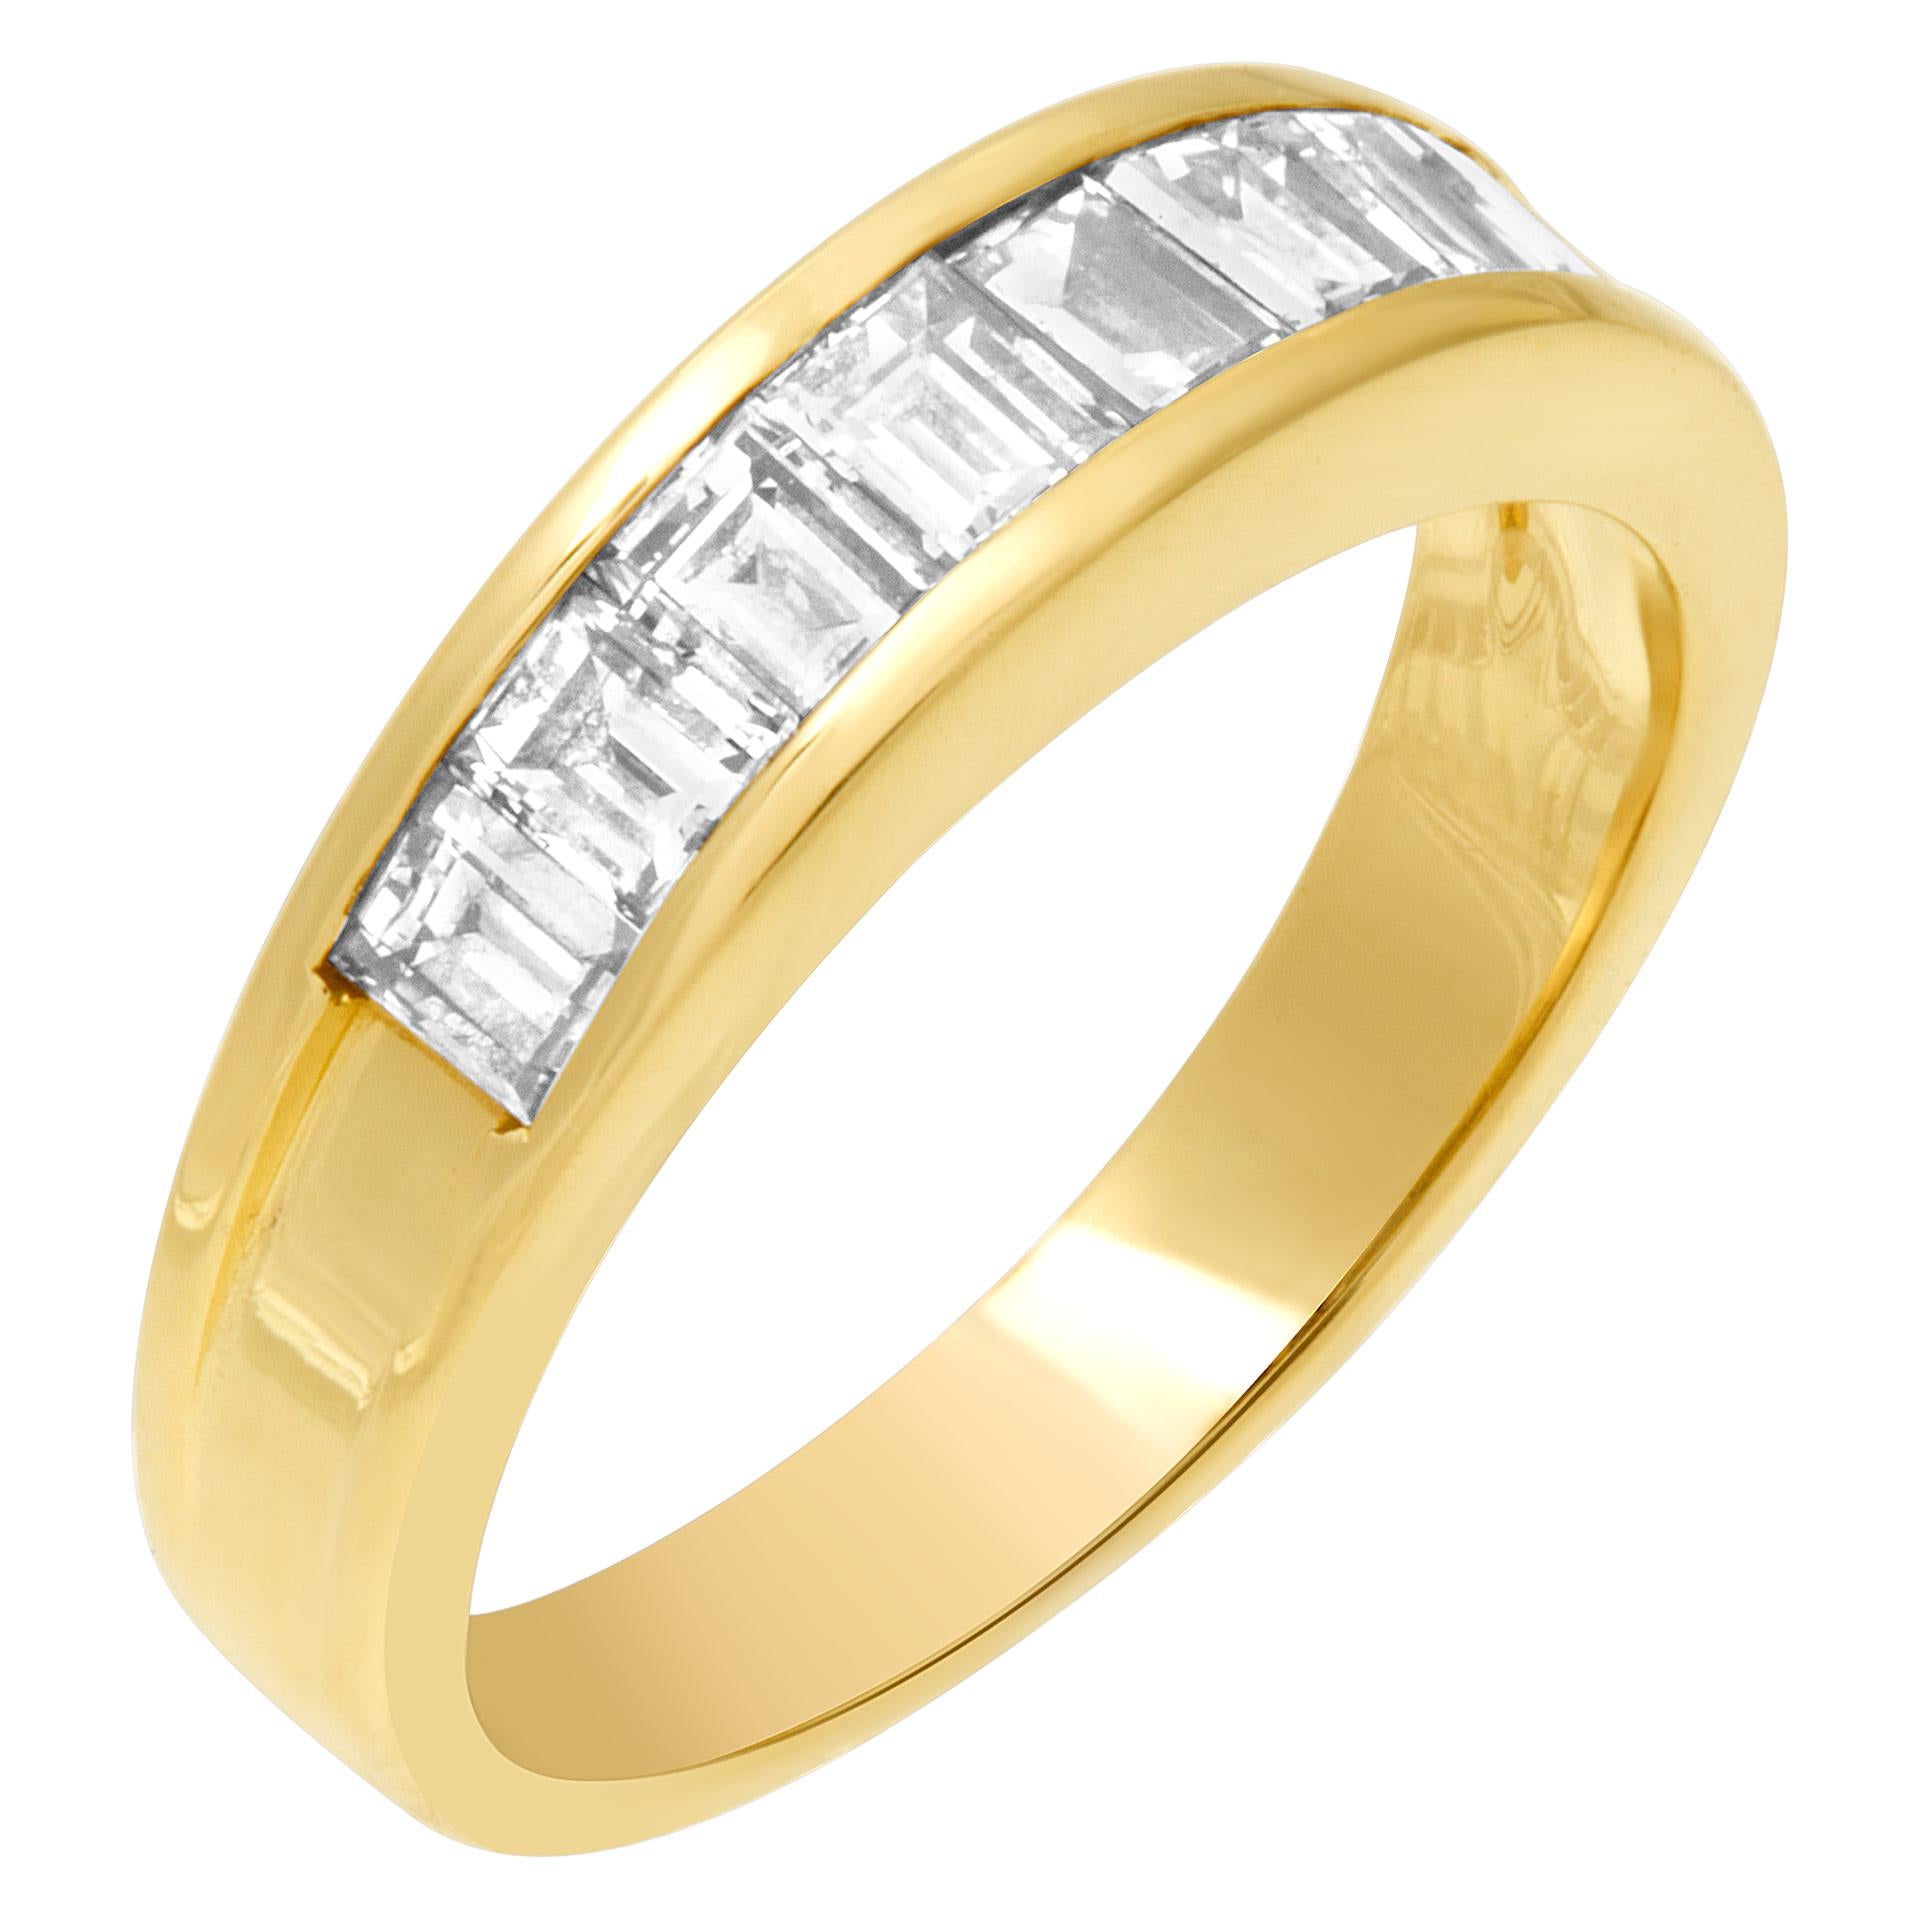 Diamond ring in 18k yellow gold with approx. 1.00 carats in baguette diamonds (G-H color, VS clarity). Size 5.25

This Diamond ring is currently size 5.25 and some items can be sized up or down, please ask! It weighs 2.5 pennyweights and is 18k.